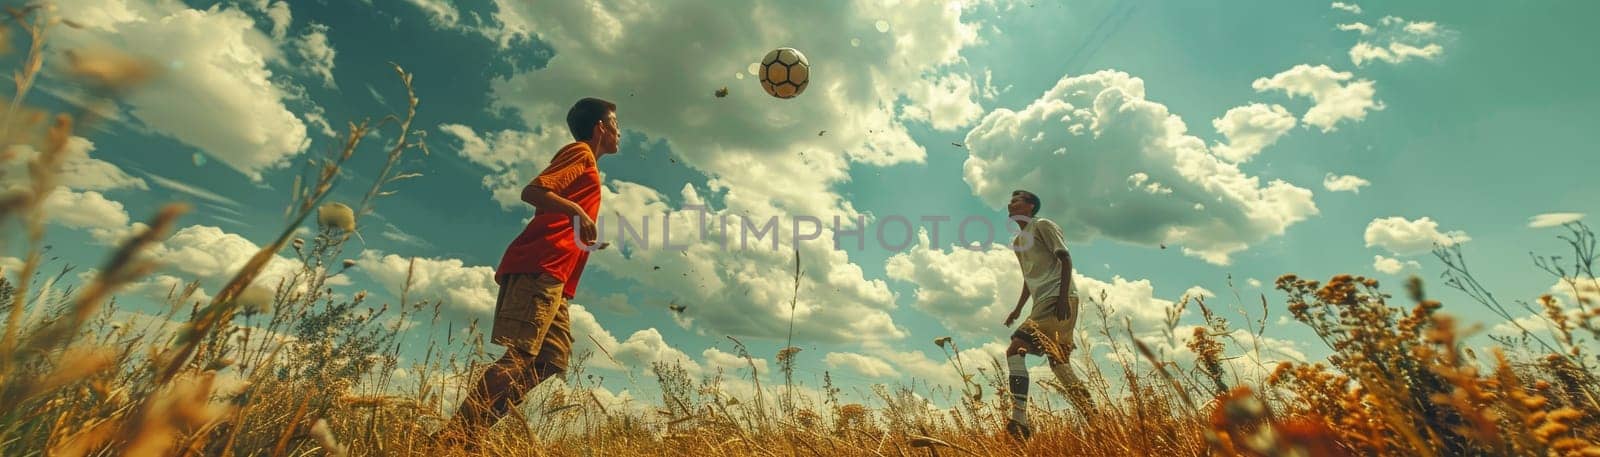 Two soccer players are playing a game of soccer in a field by itchaznong